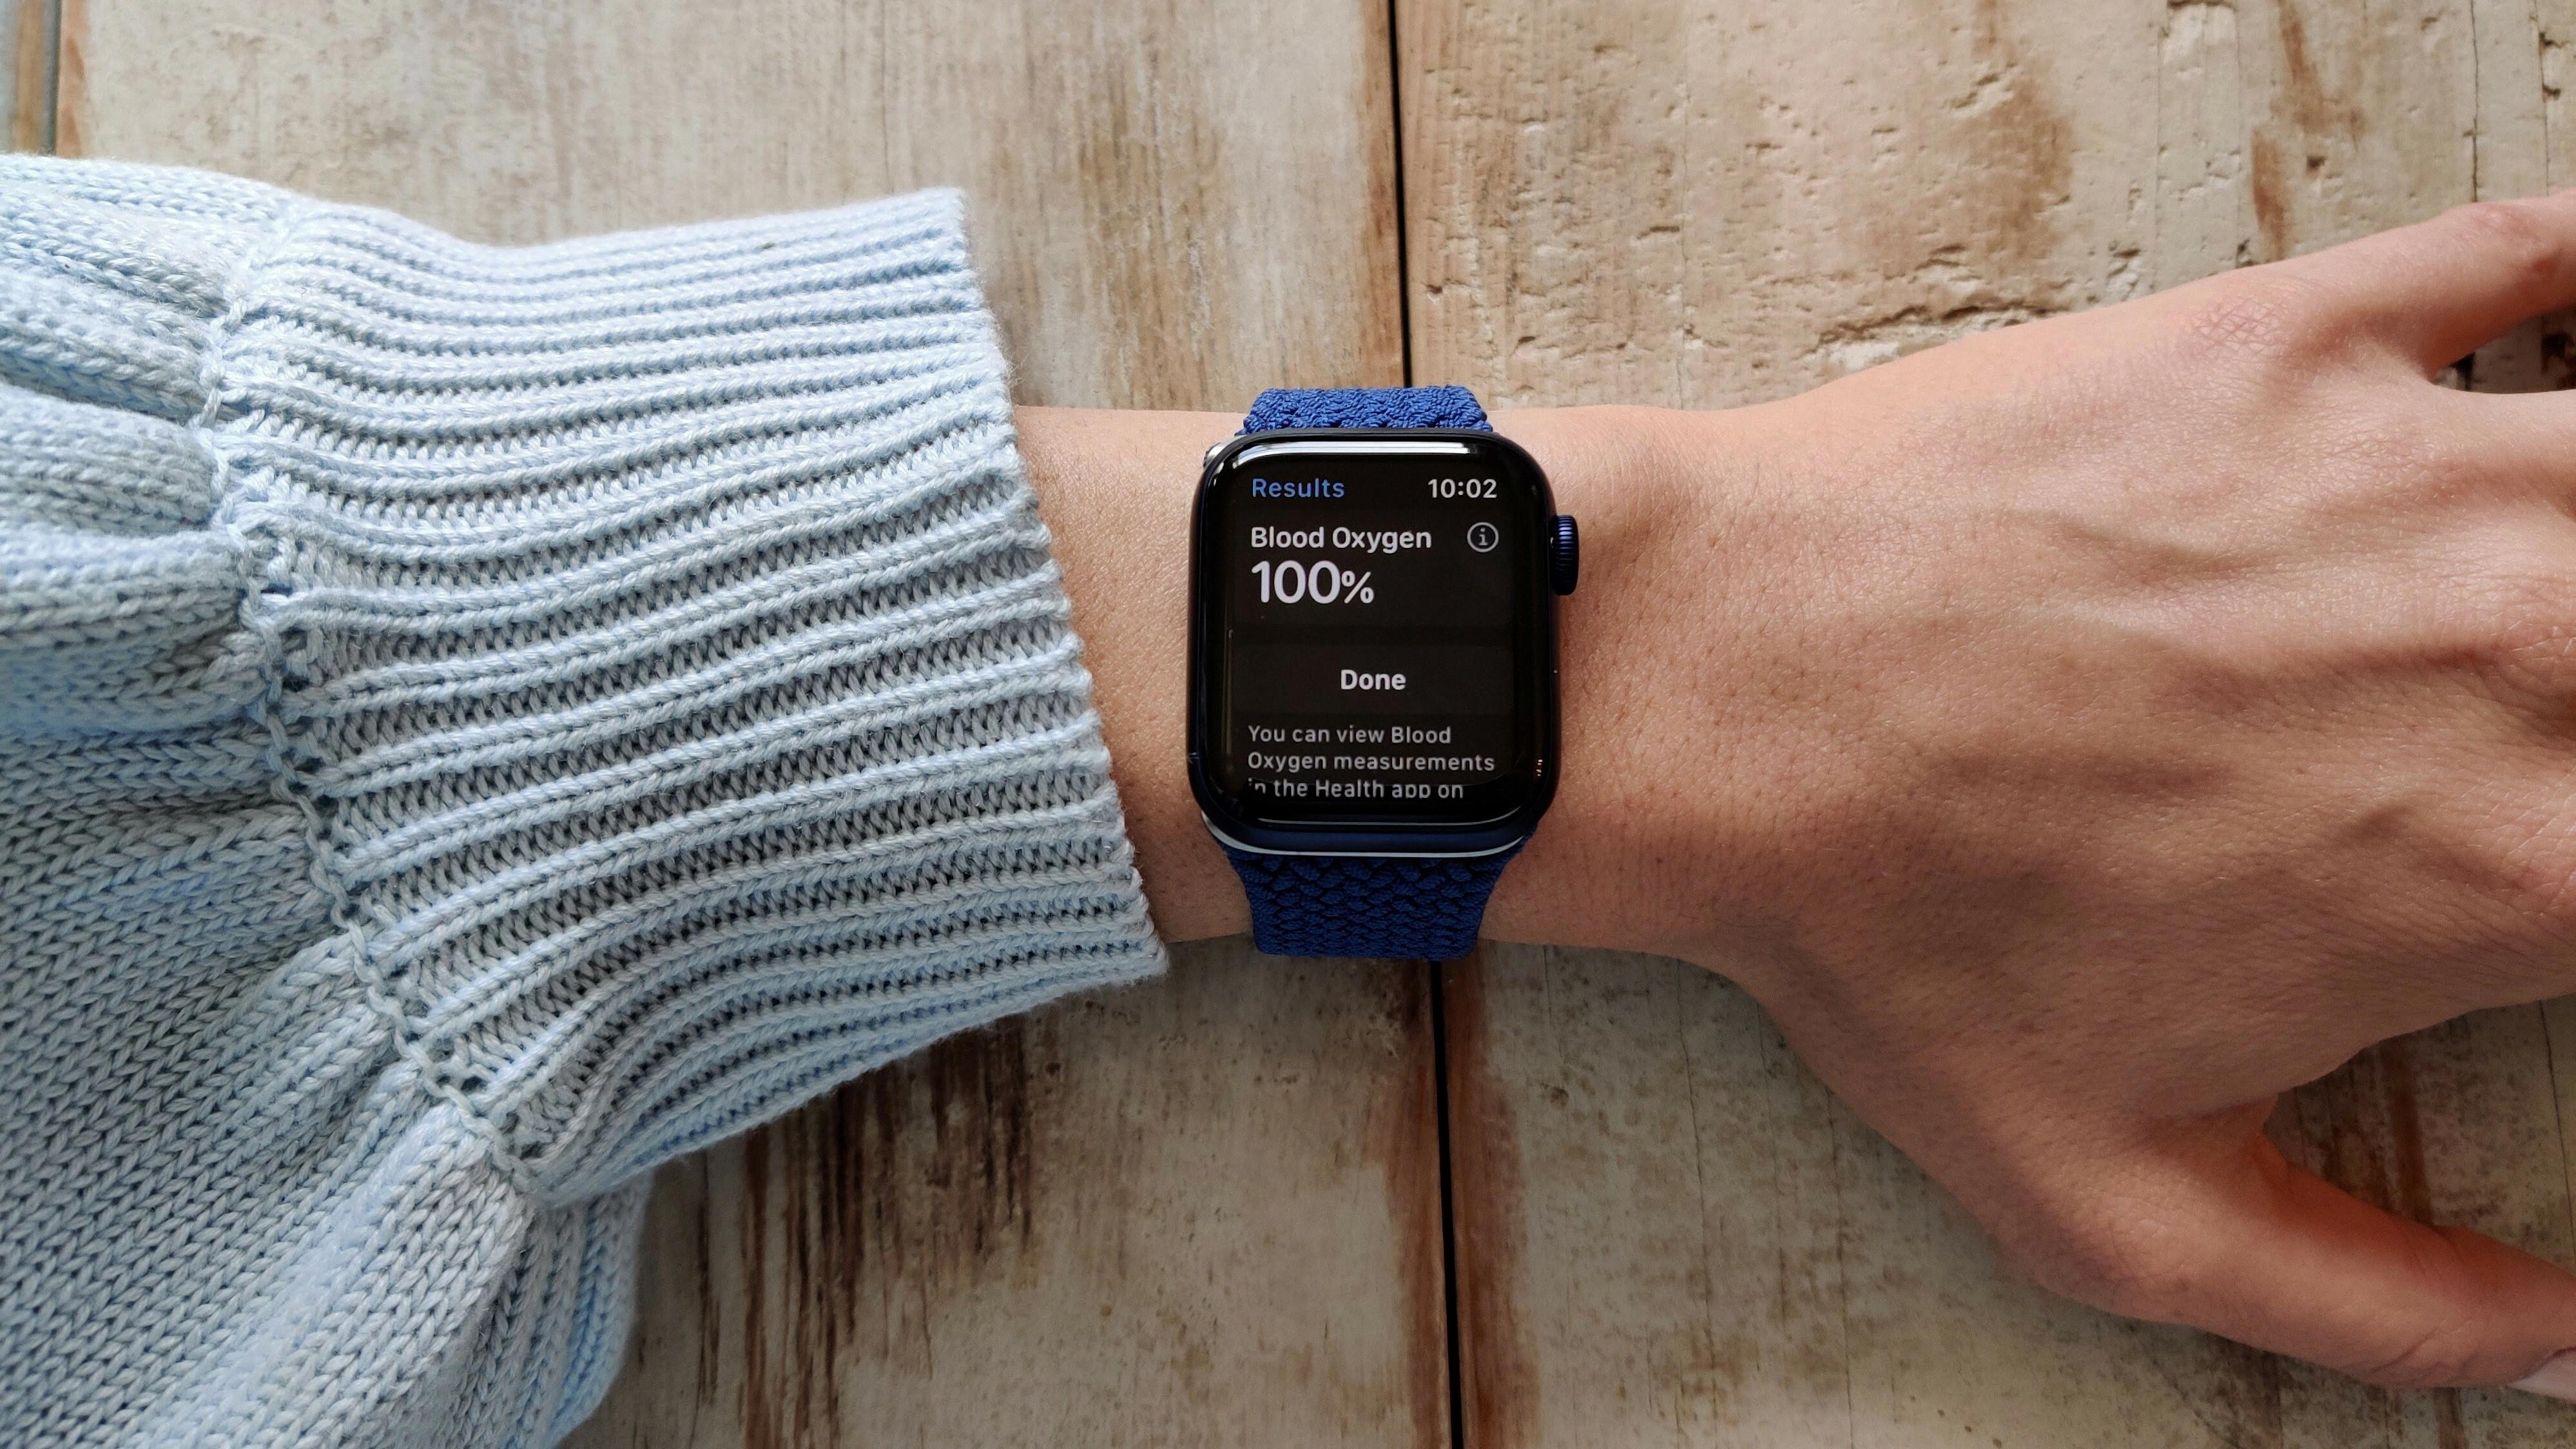 How to Track Your Blood Oxygen Levels on Apple Watch? 7